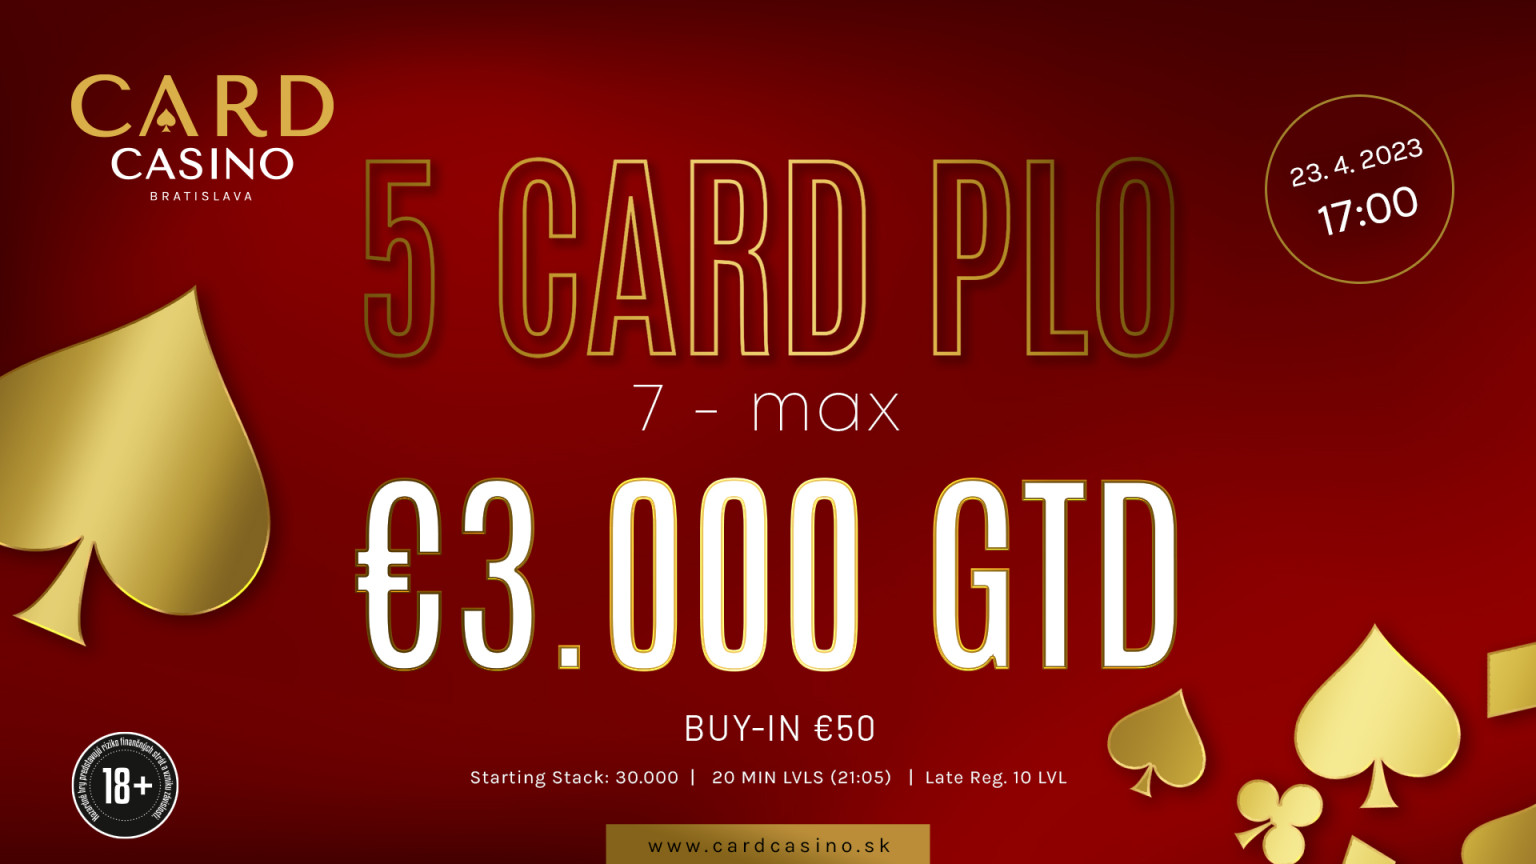 Week of One day Tournaments brings PLO, Big Stack and Myster Bounty €25,000